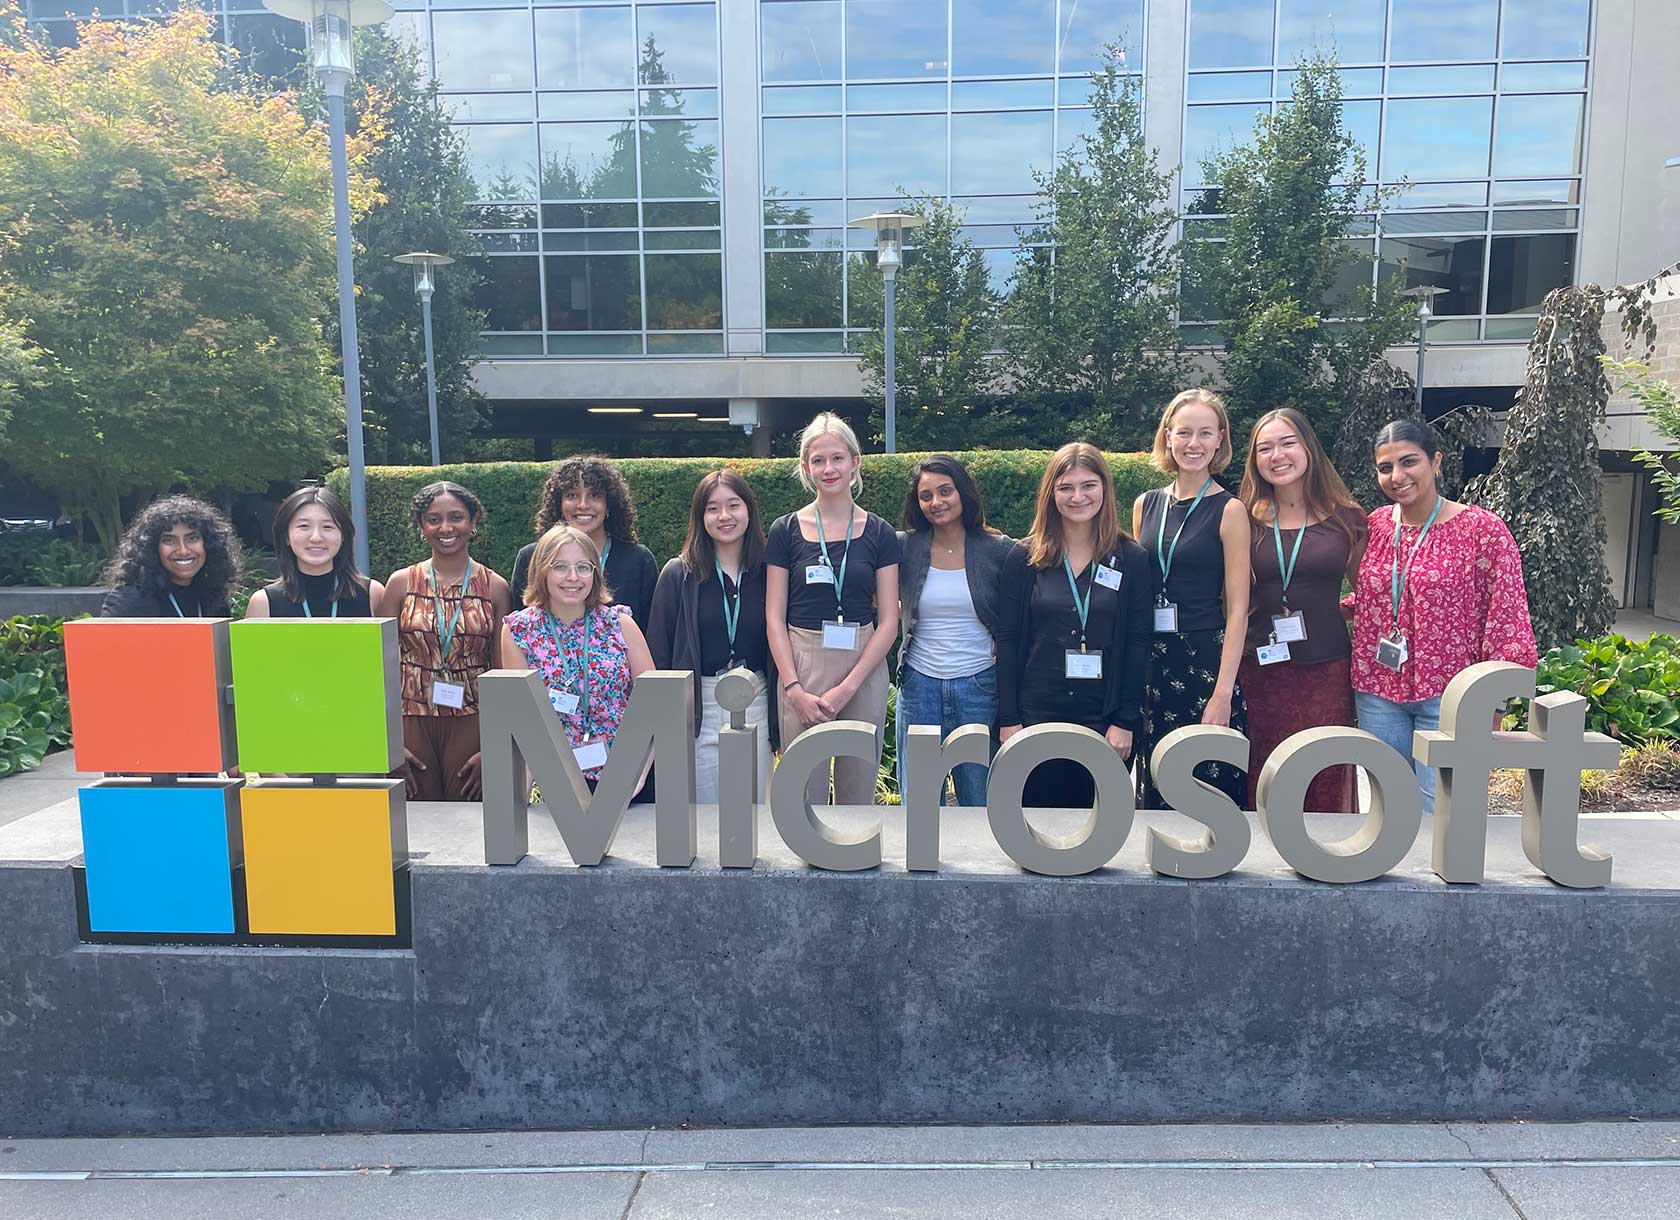 Scripps students pose with the Microsoft sign on a Seattle Career Exploration Trek